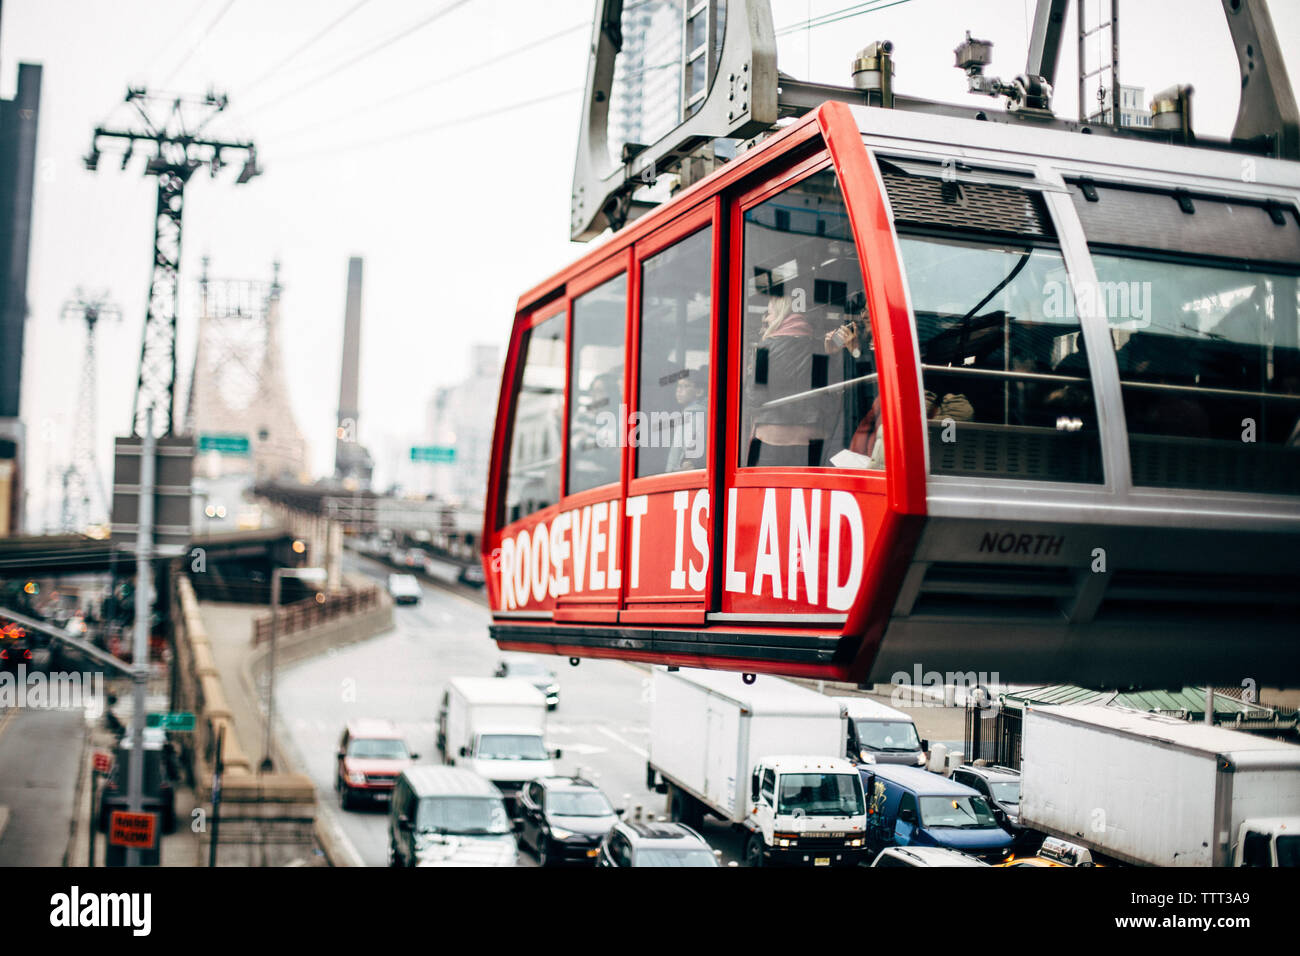 Tourists in overhead cable car traveling at city Stock Photo